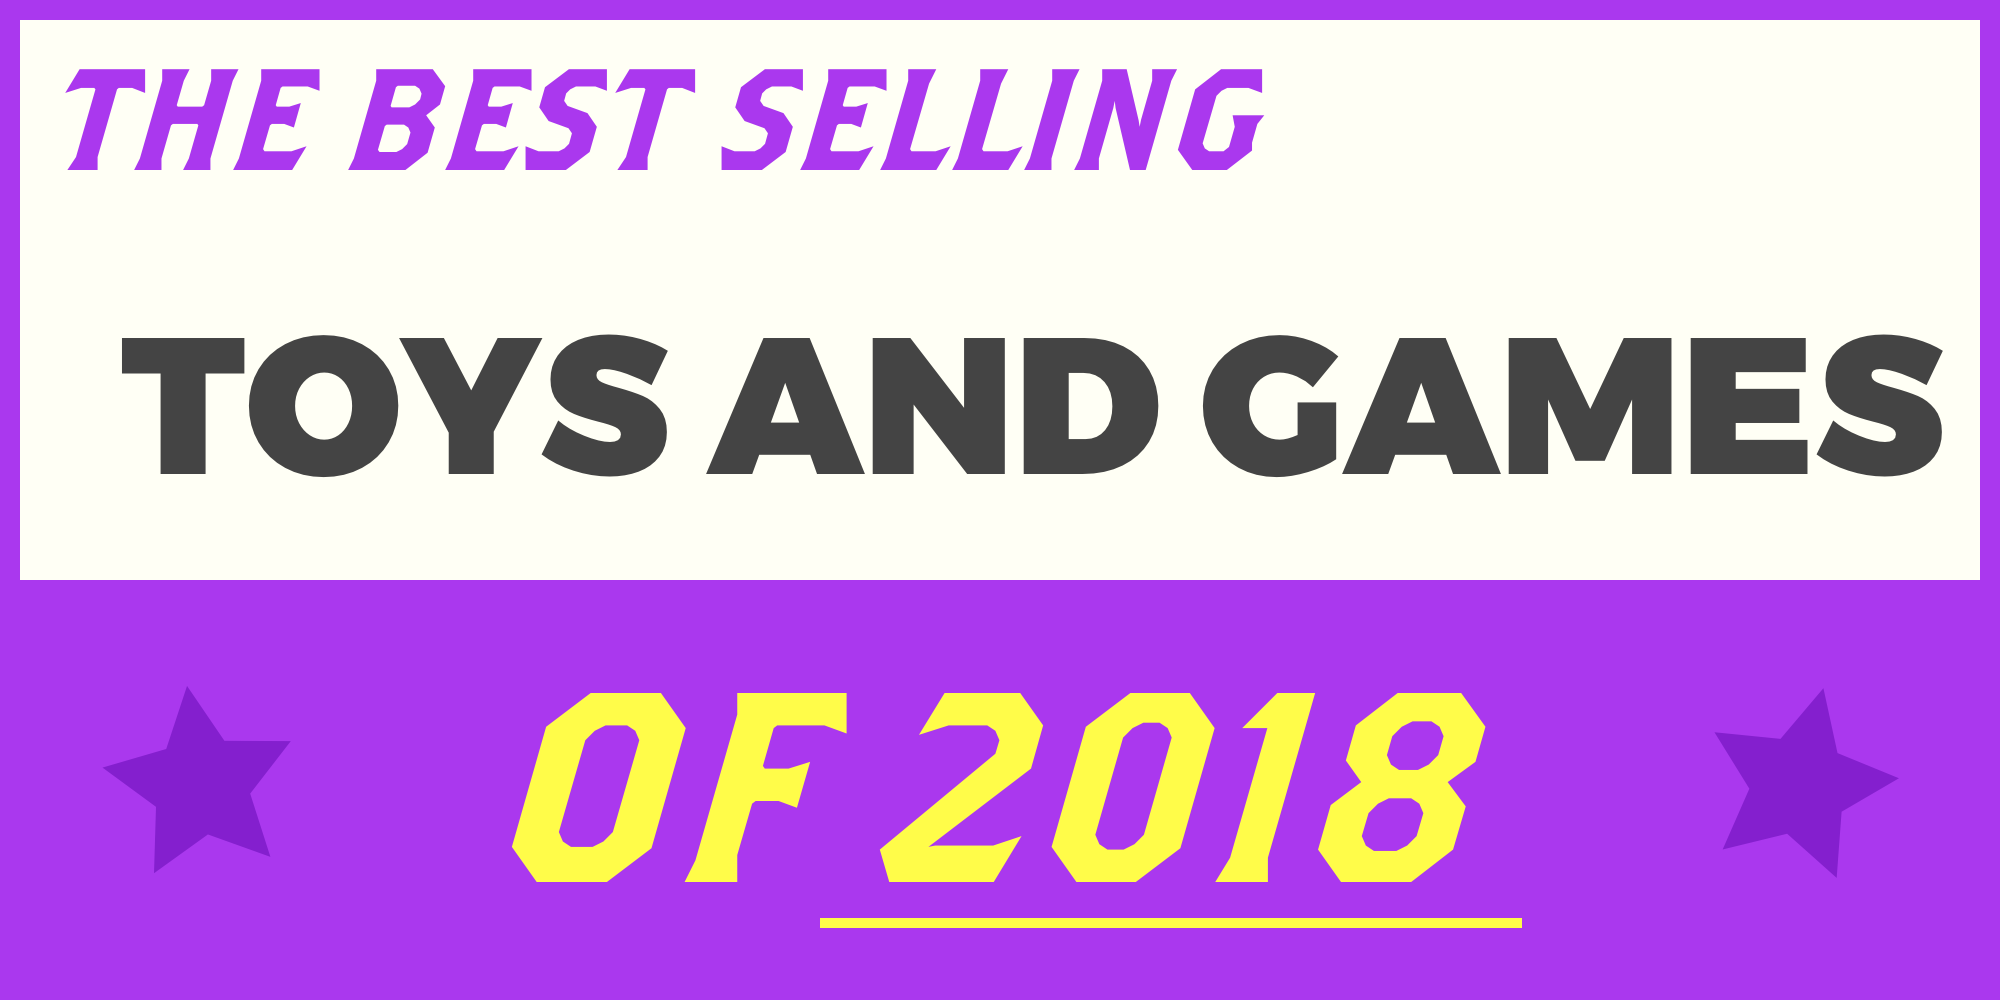 best selling toys 2018